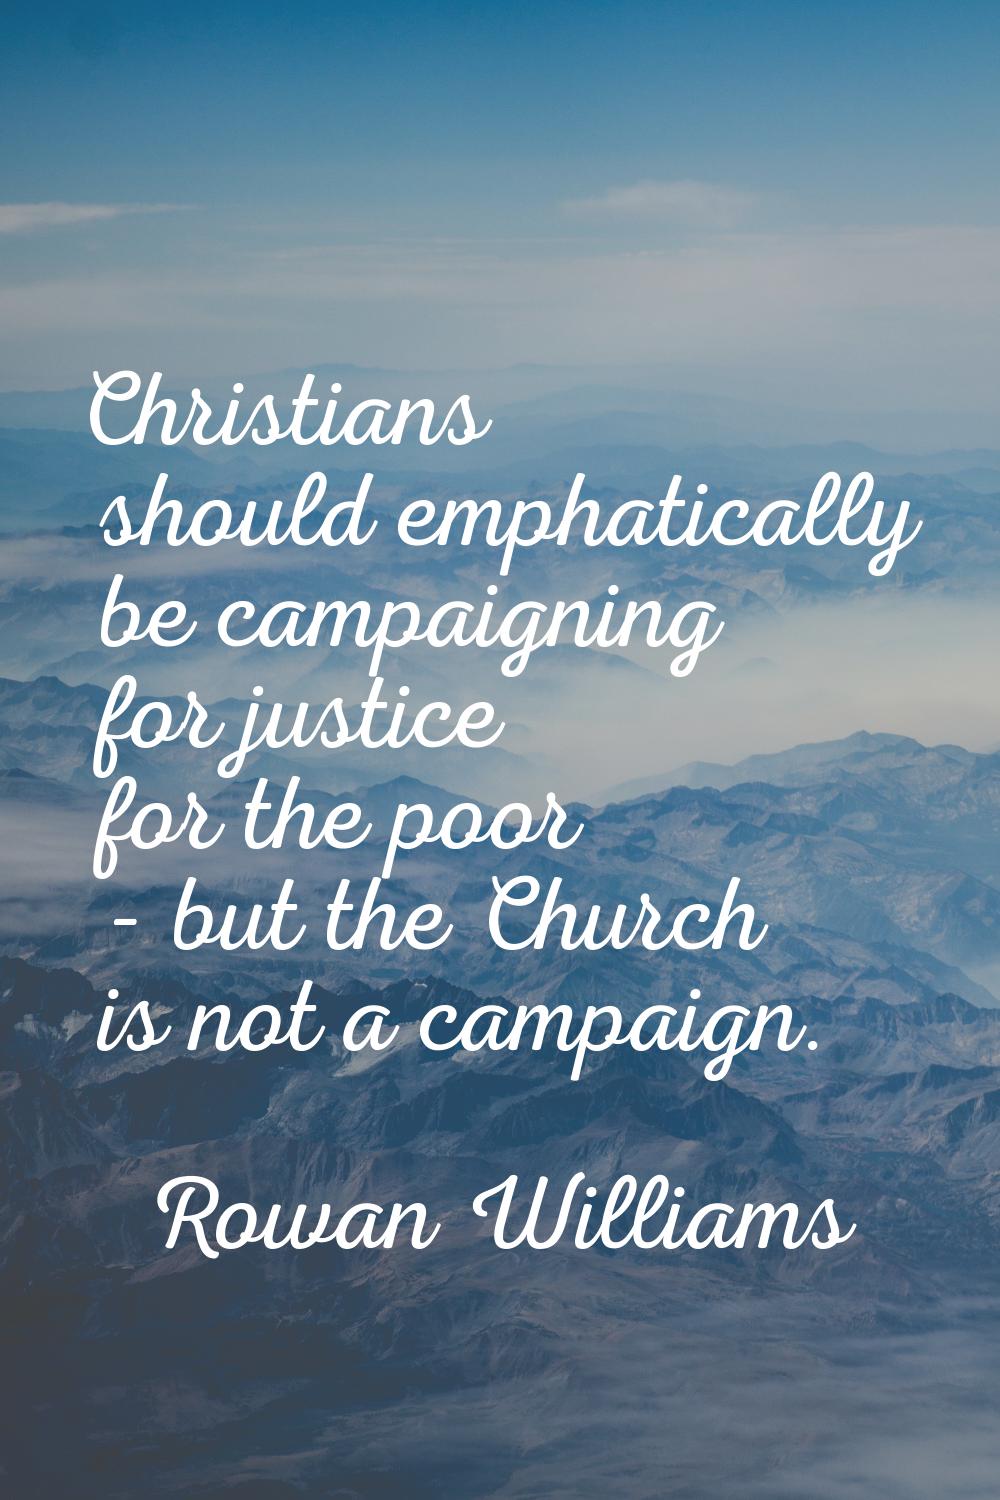 Christians should emphatically be campaigning for justice for the poor - but the Church is not a ca